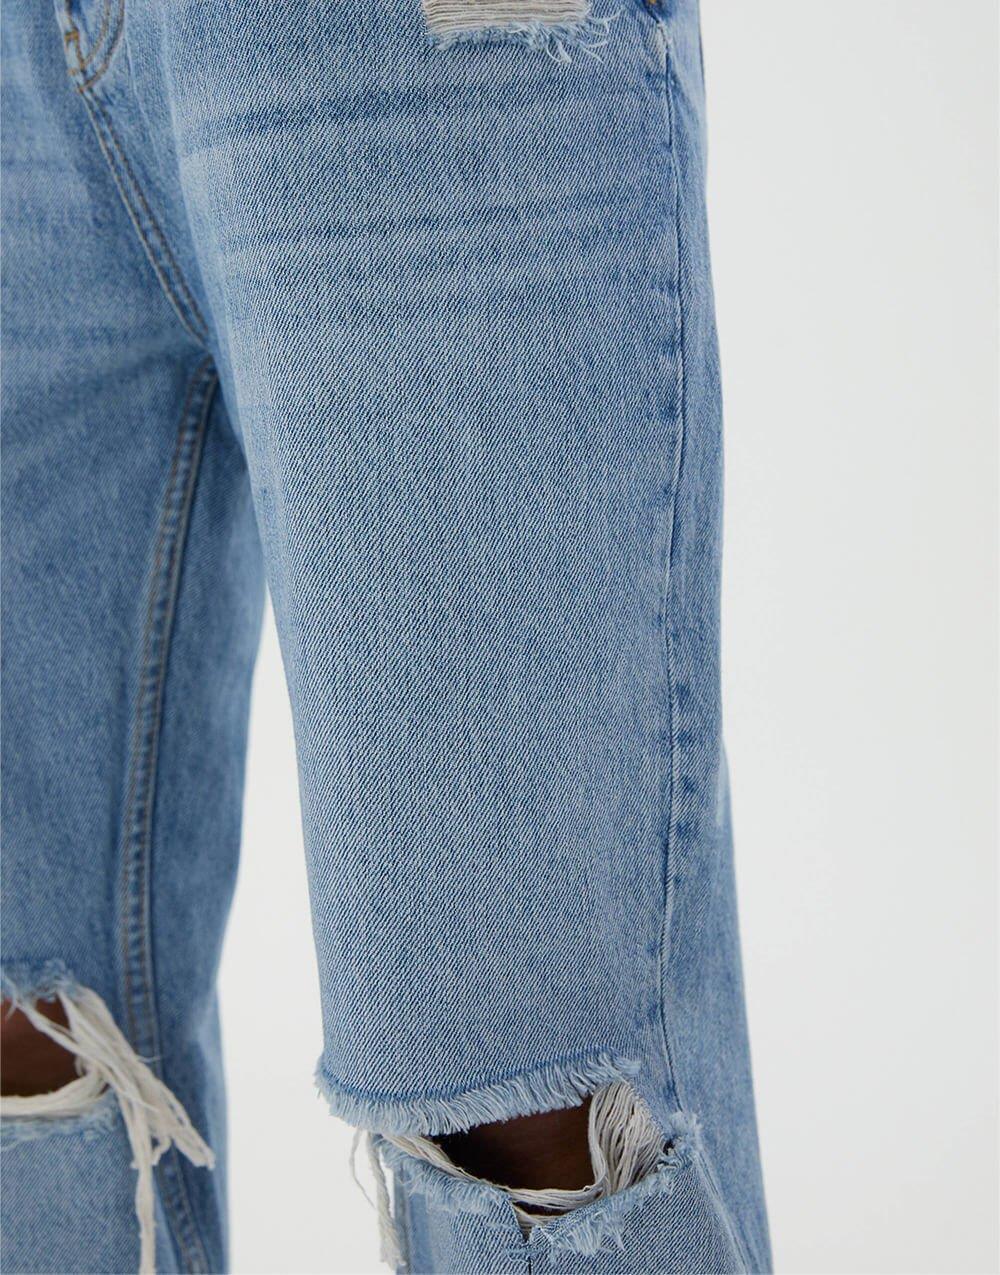 Relaxed Essentials Mens Jeans Blue - STREET MODE ™